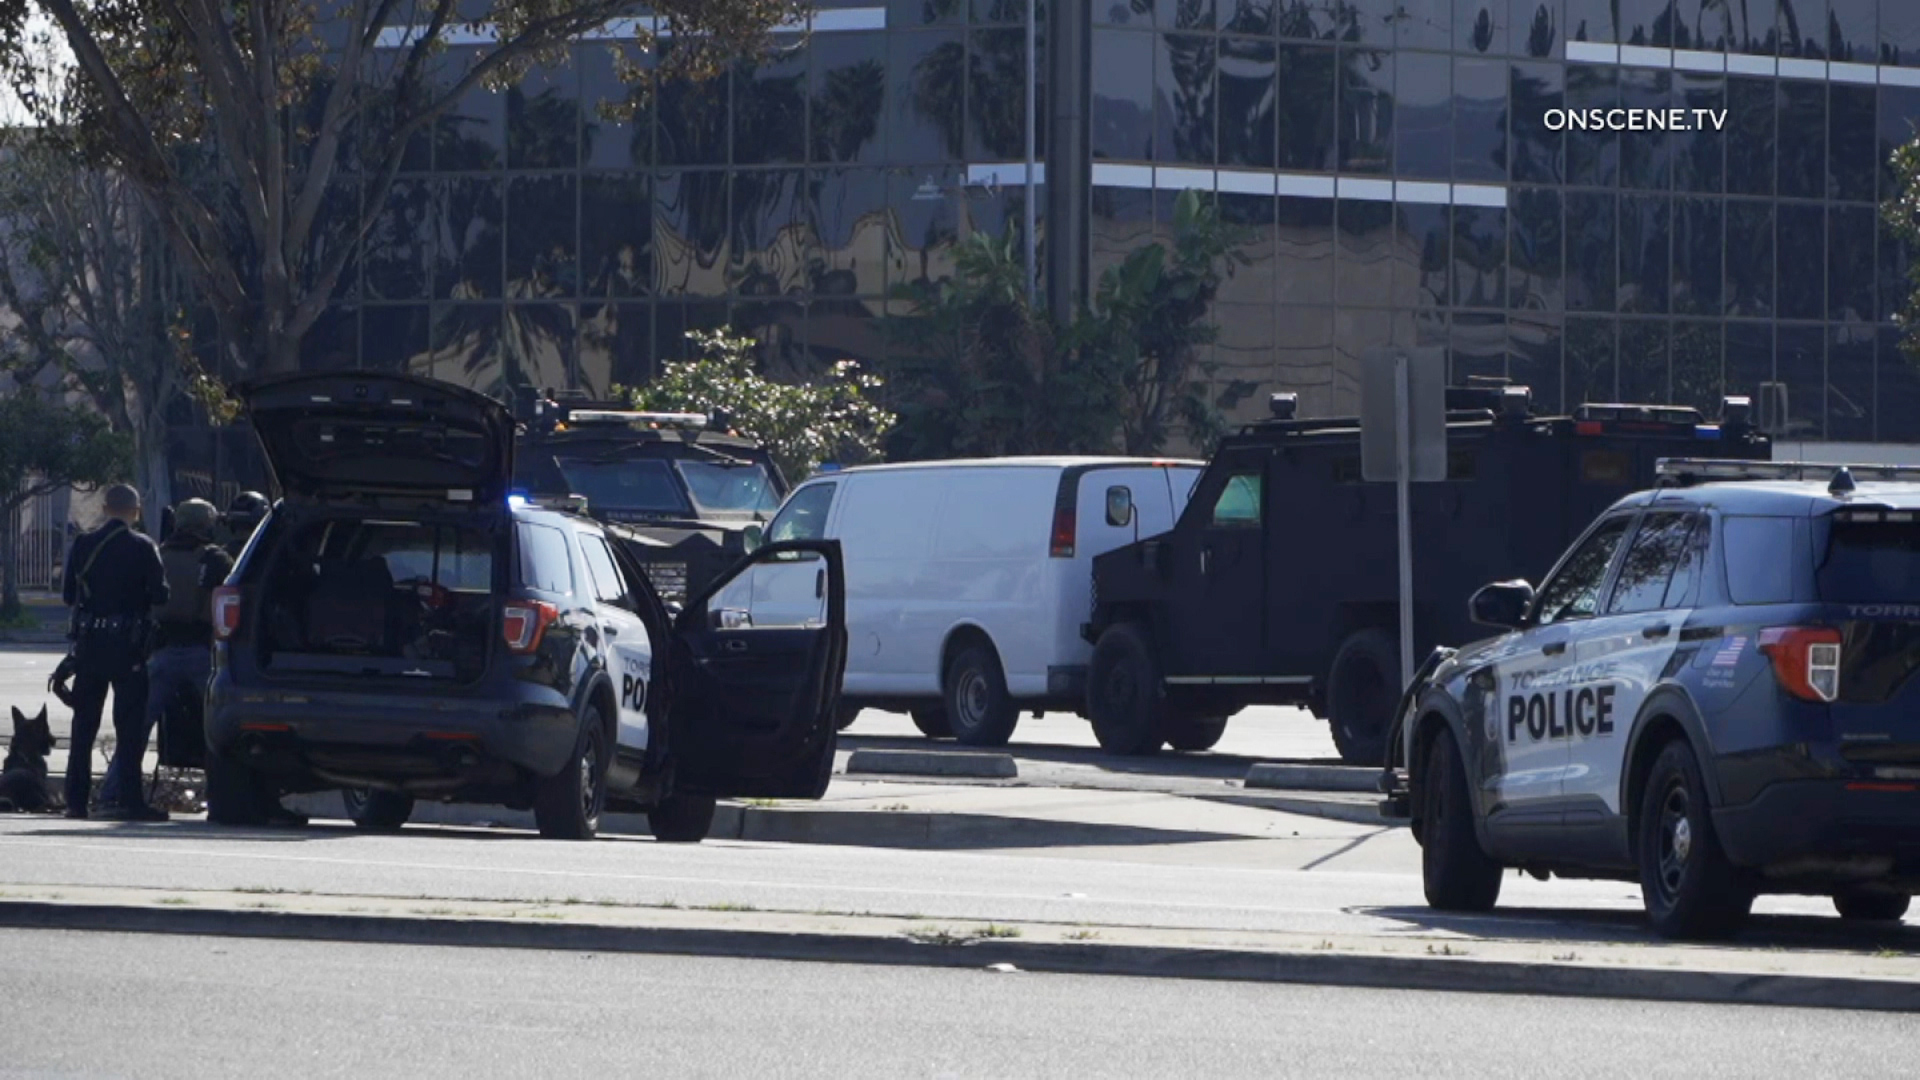 Police vehicles surround a white van during a standoff in Torrence, California, Sunday. 